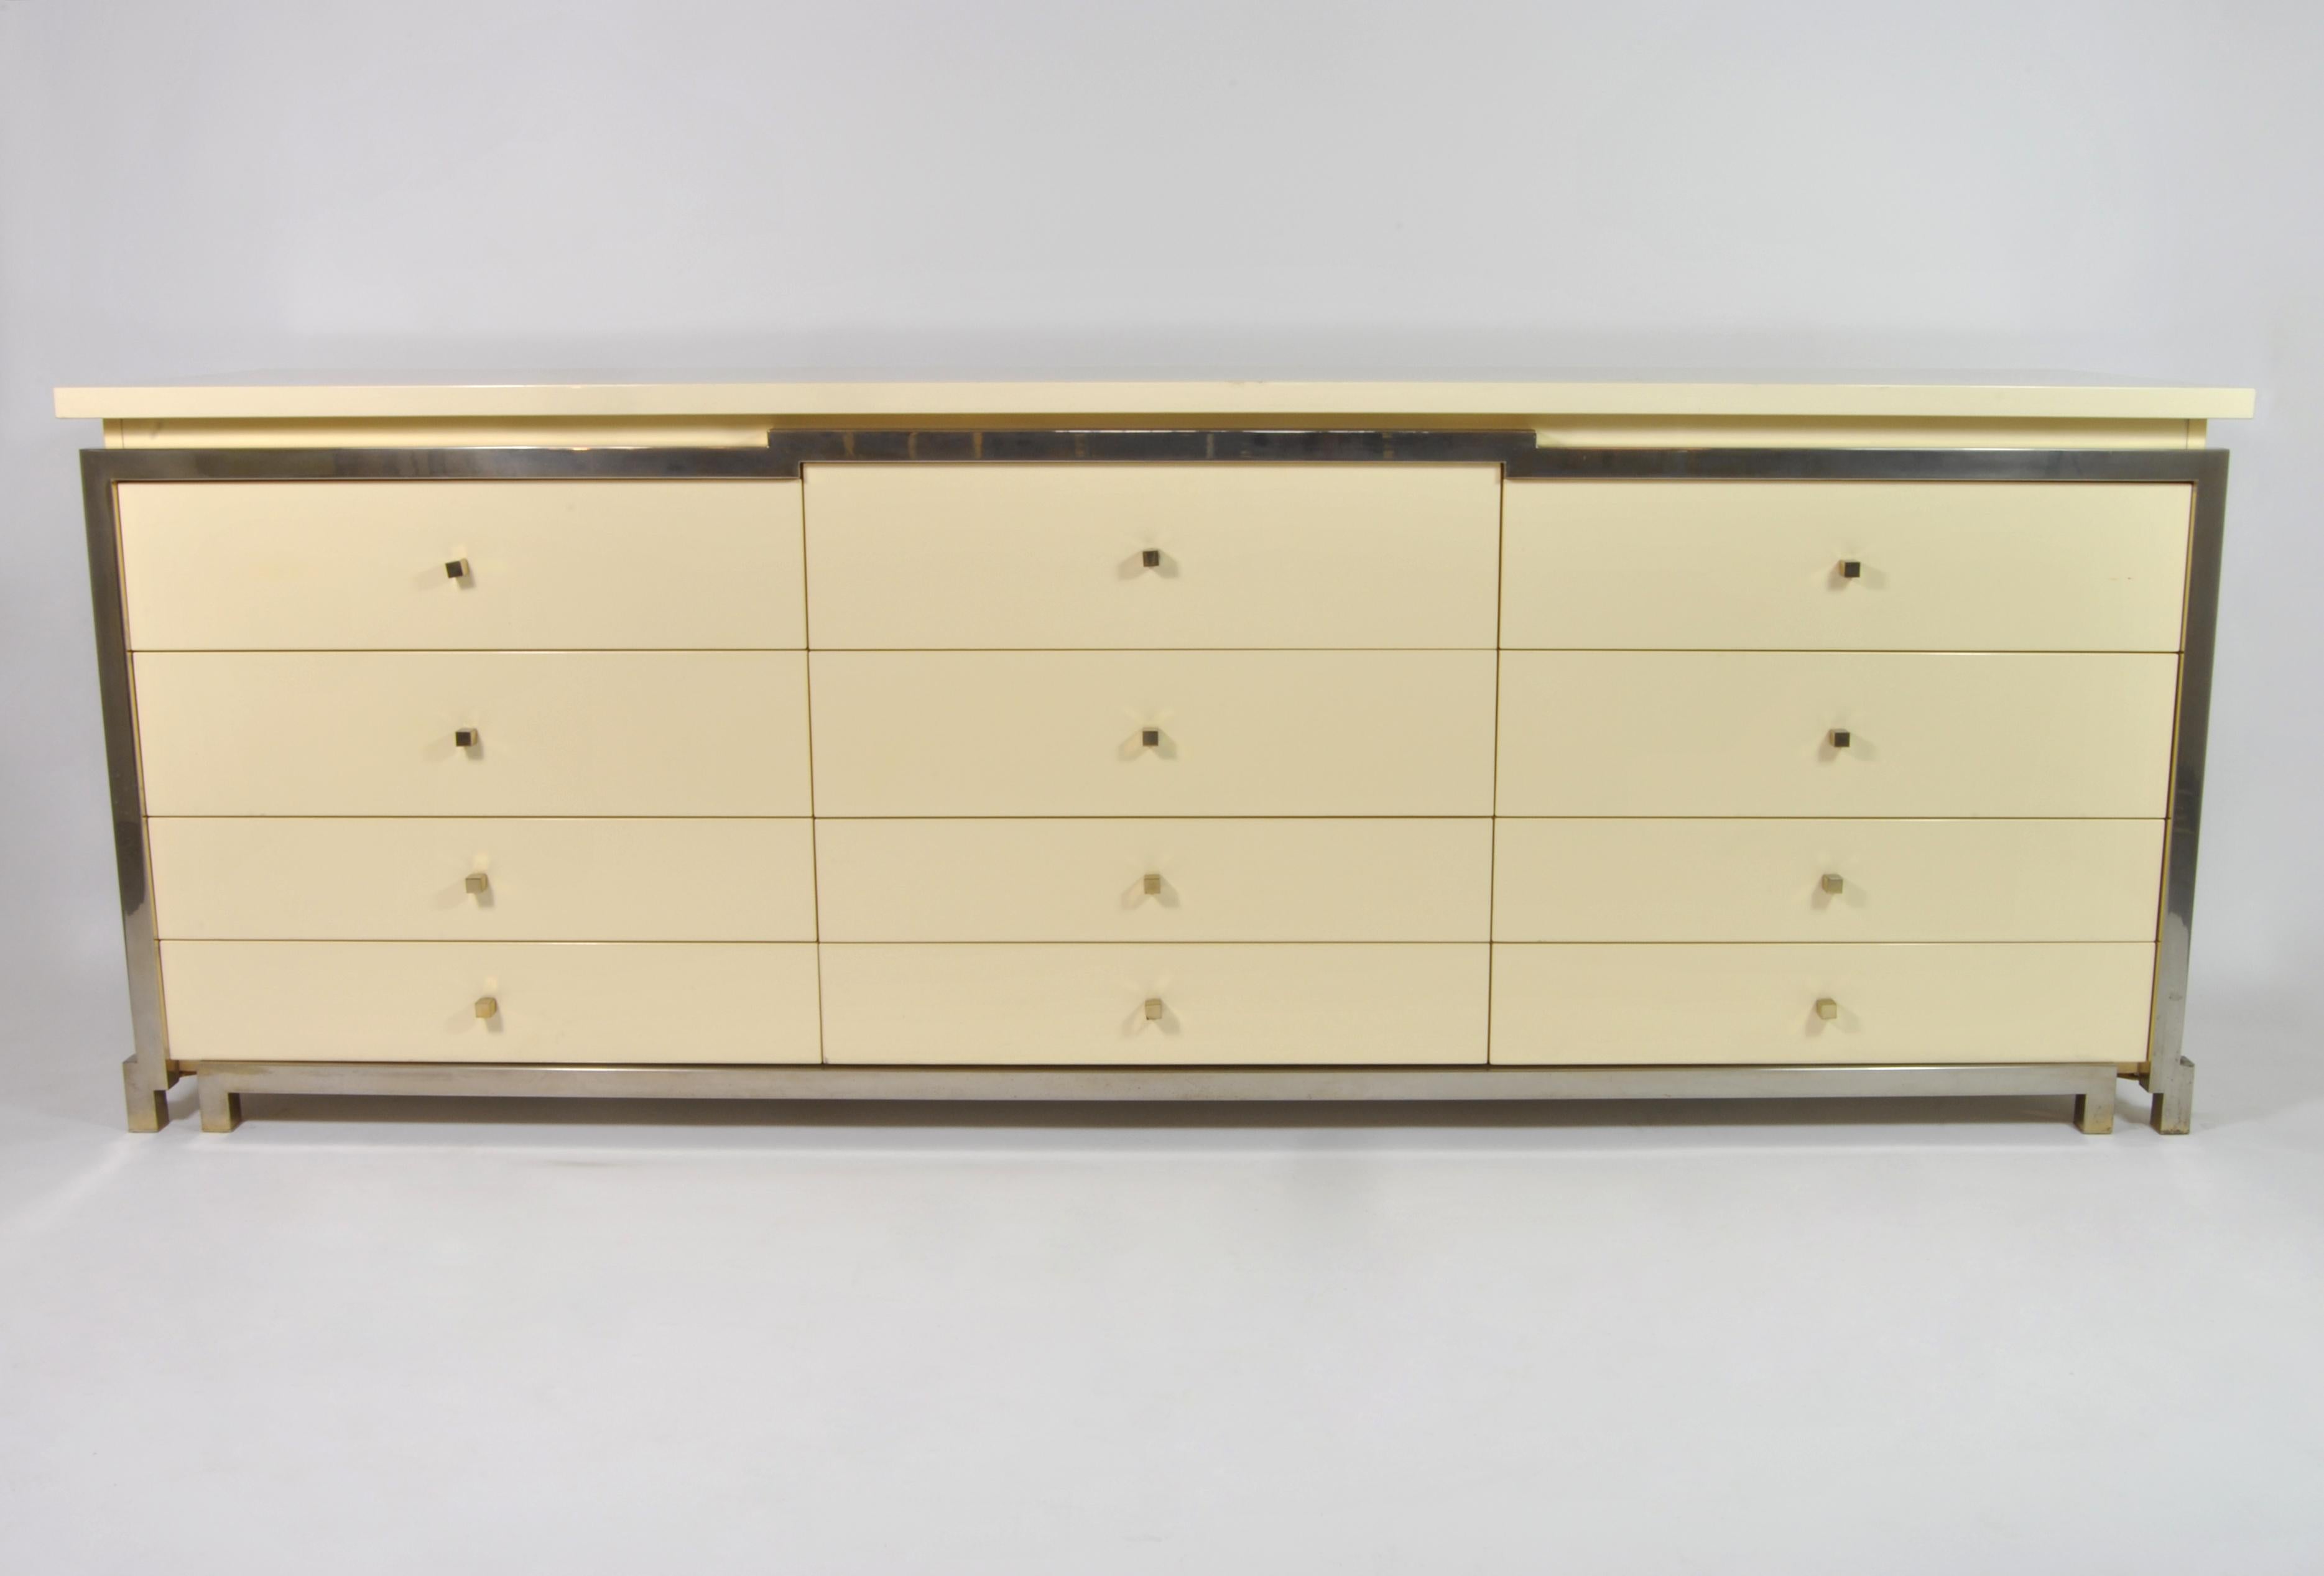 Buffet, design attributed to Romeo Rega, Italy, 1970.
Lacquered wood and brass.